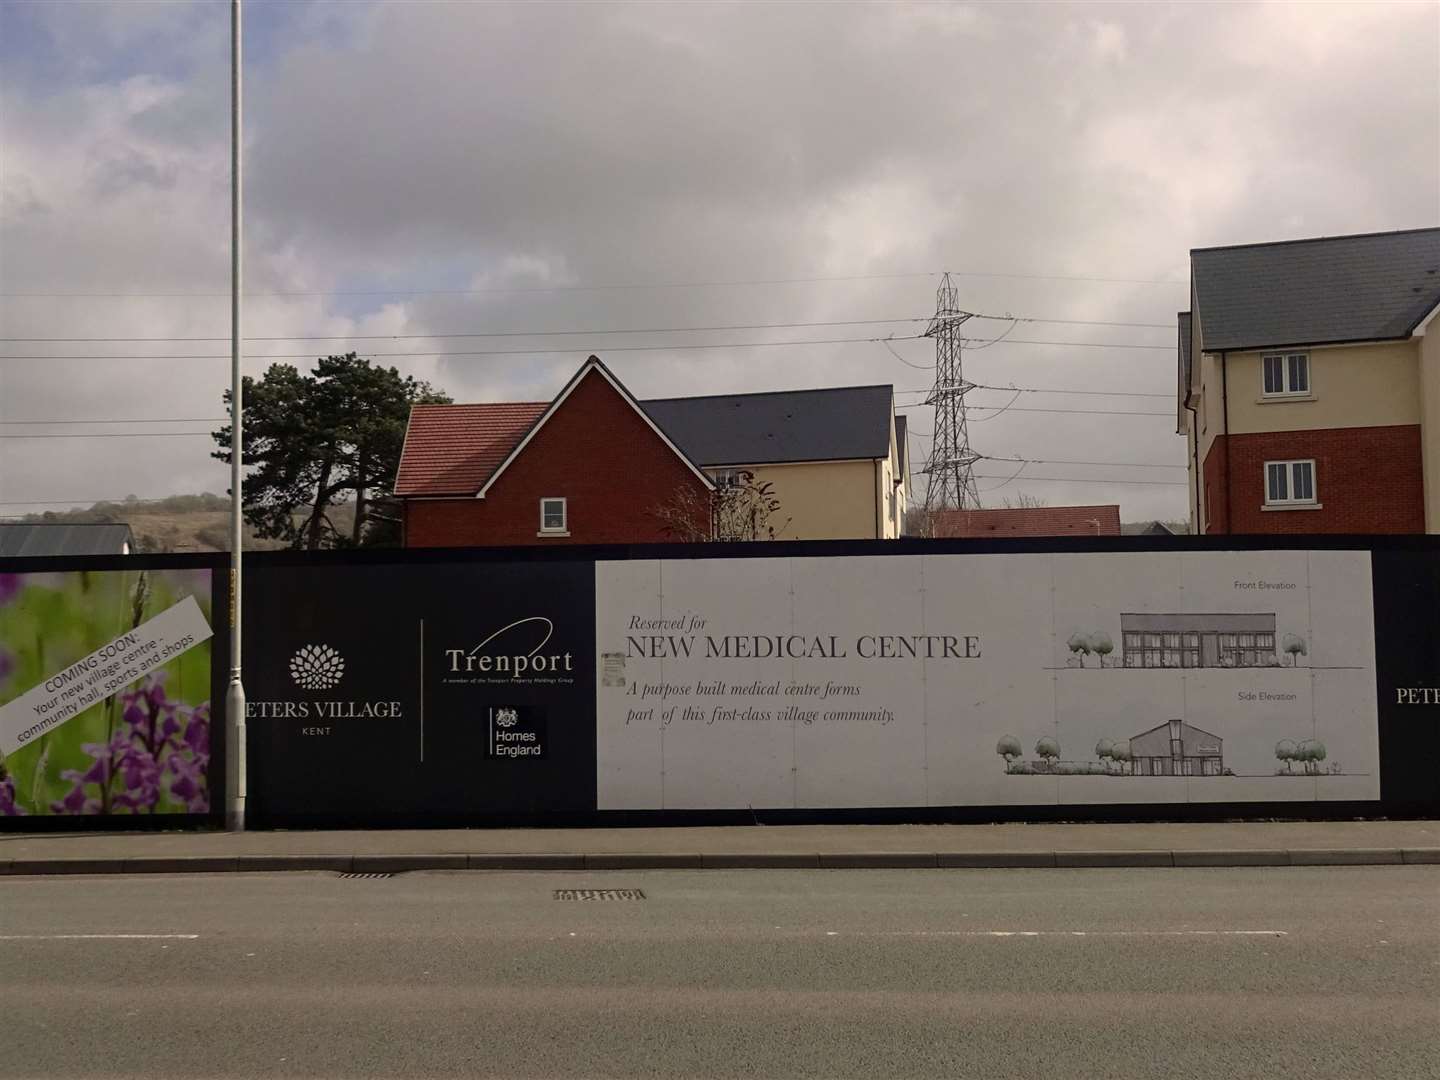 Hoardings around the site of the proposed medical centre at Peters Village